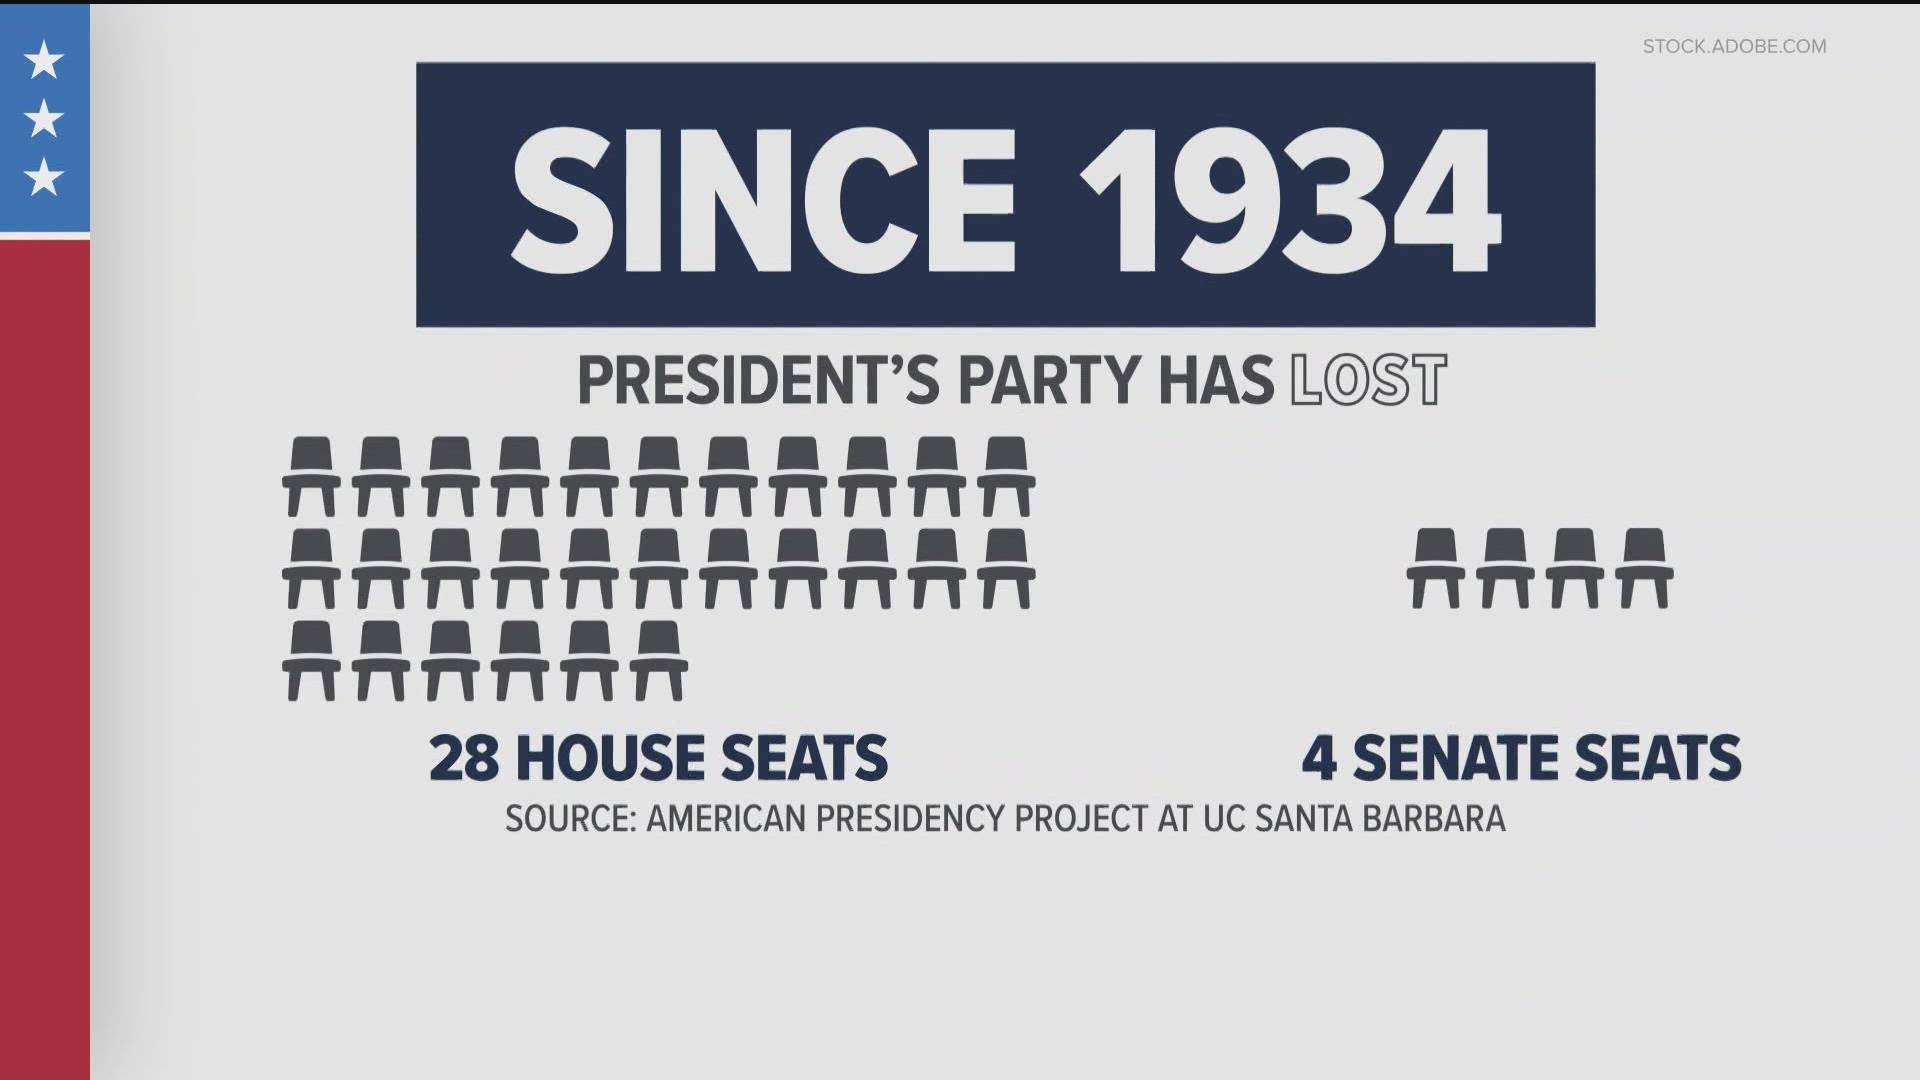 Since 1934, the President's party has lost an average of 28 house seats and four senate seats during midterm elections.